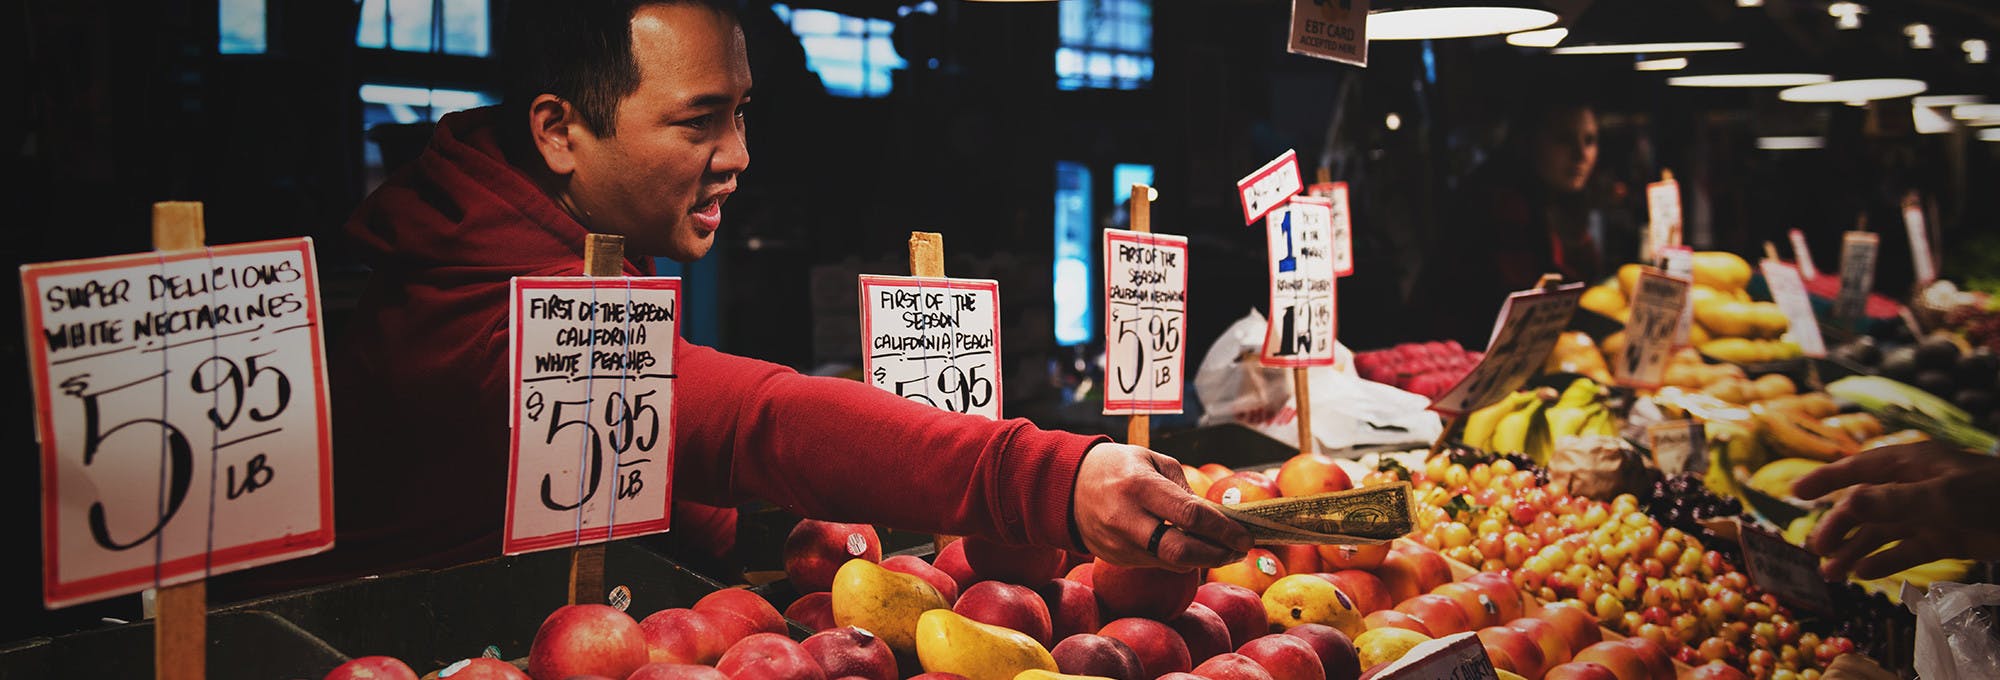 A man at a fruit or farmers market making a purchase